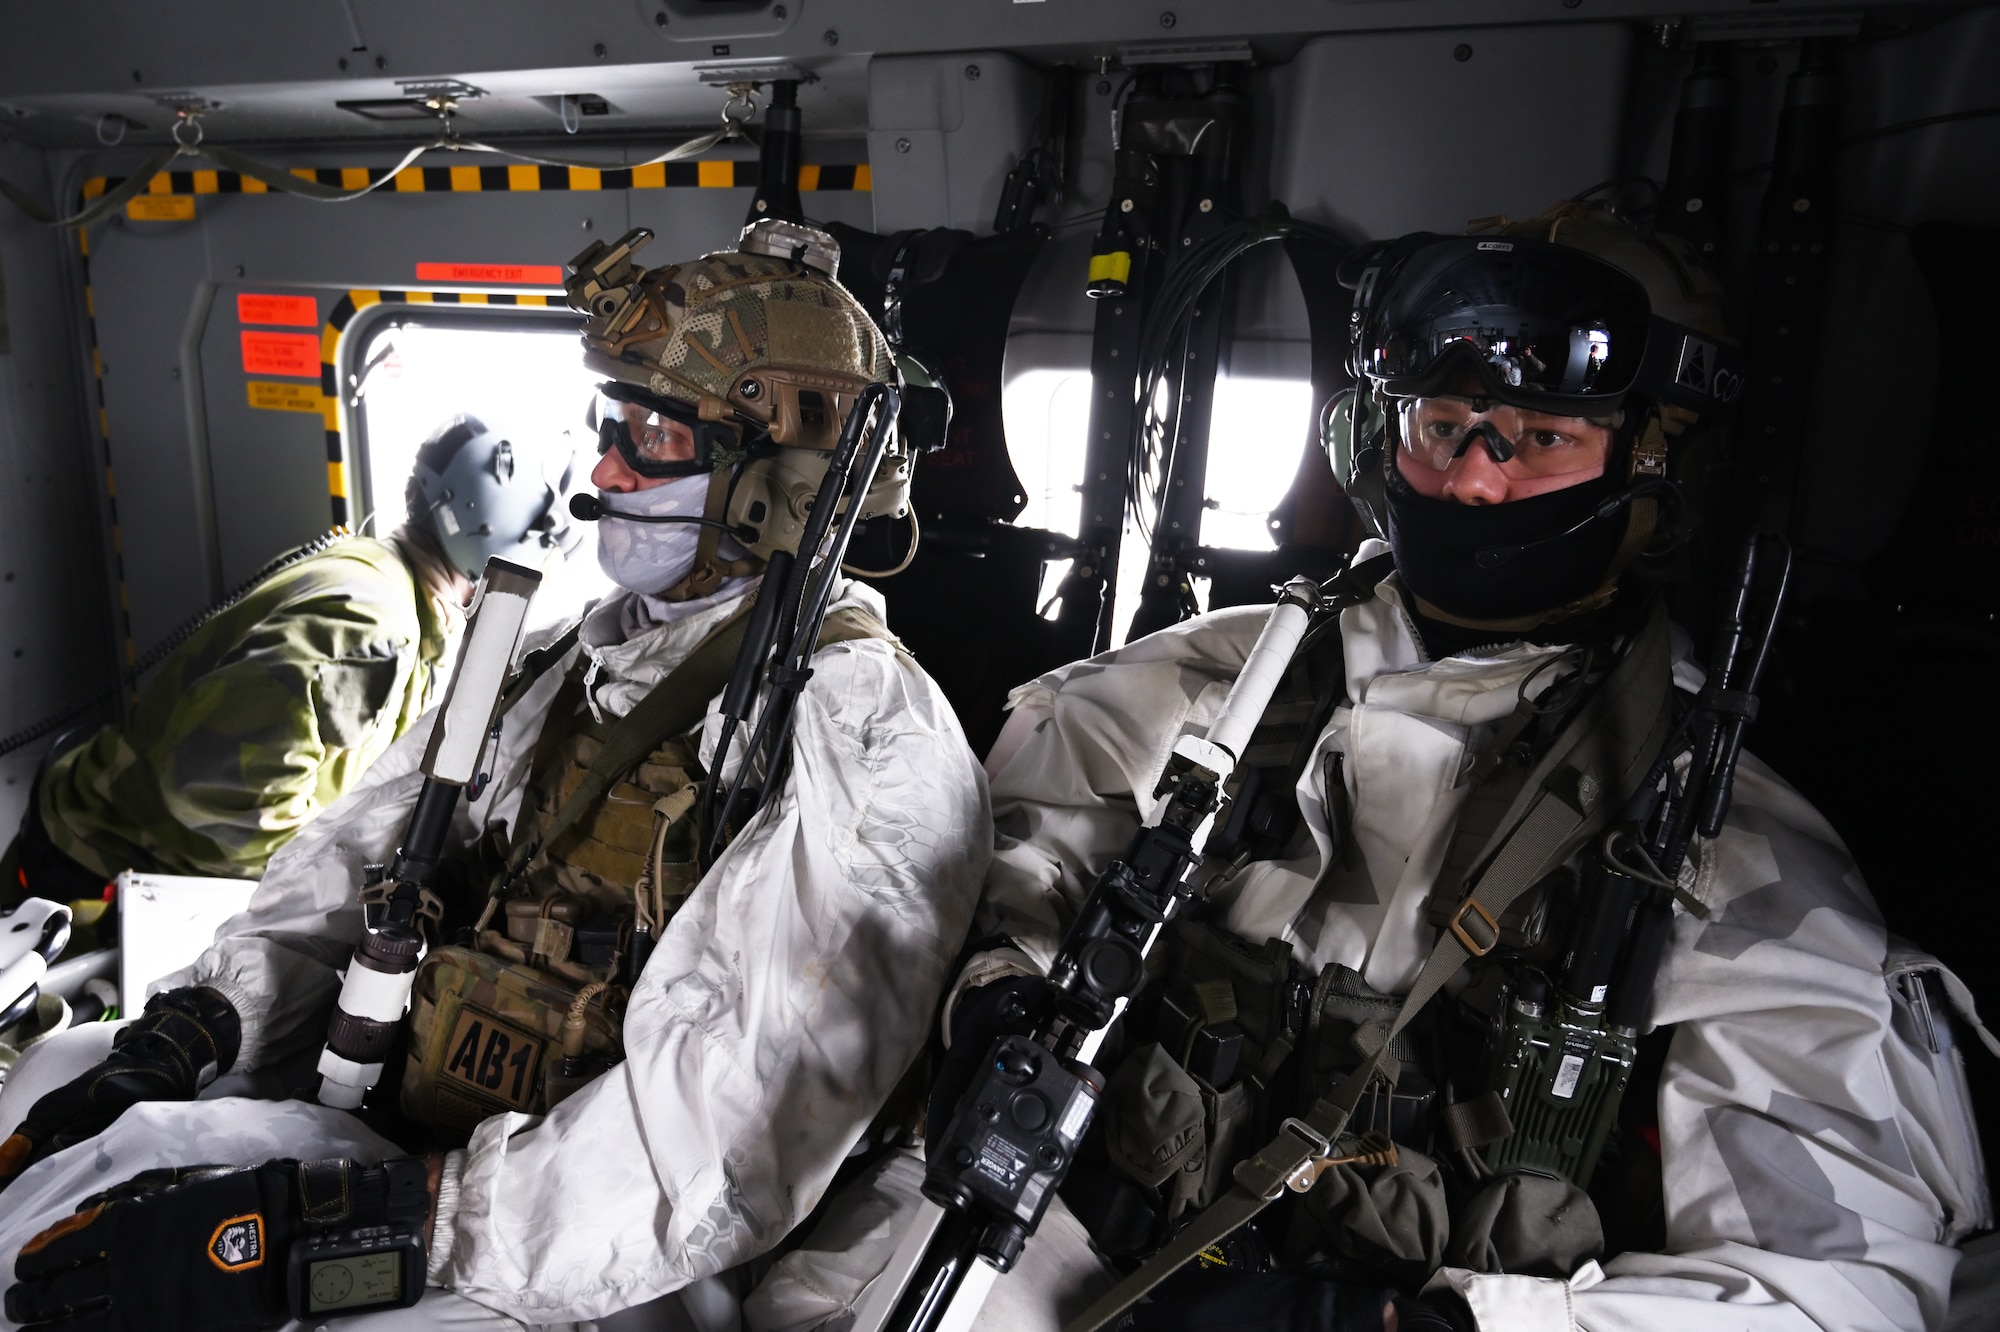 An airman flies in a helicopter.